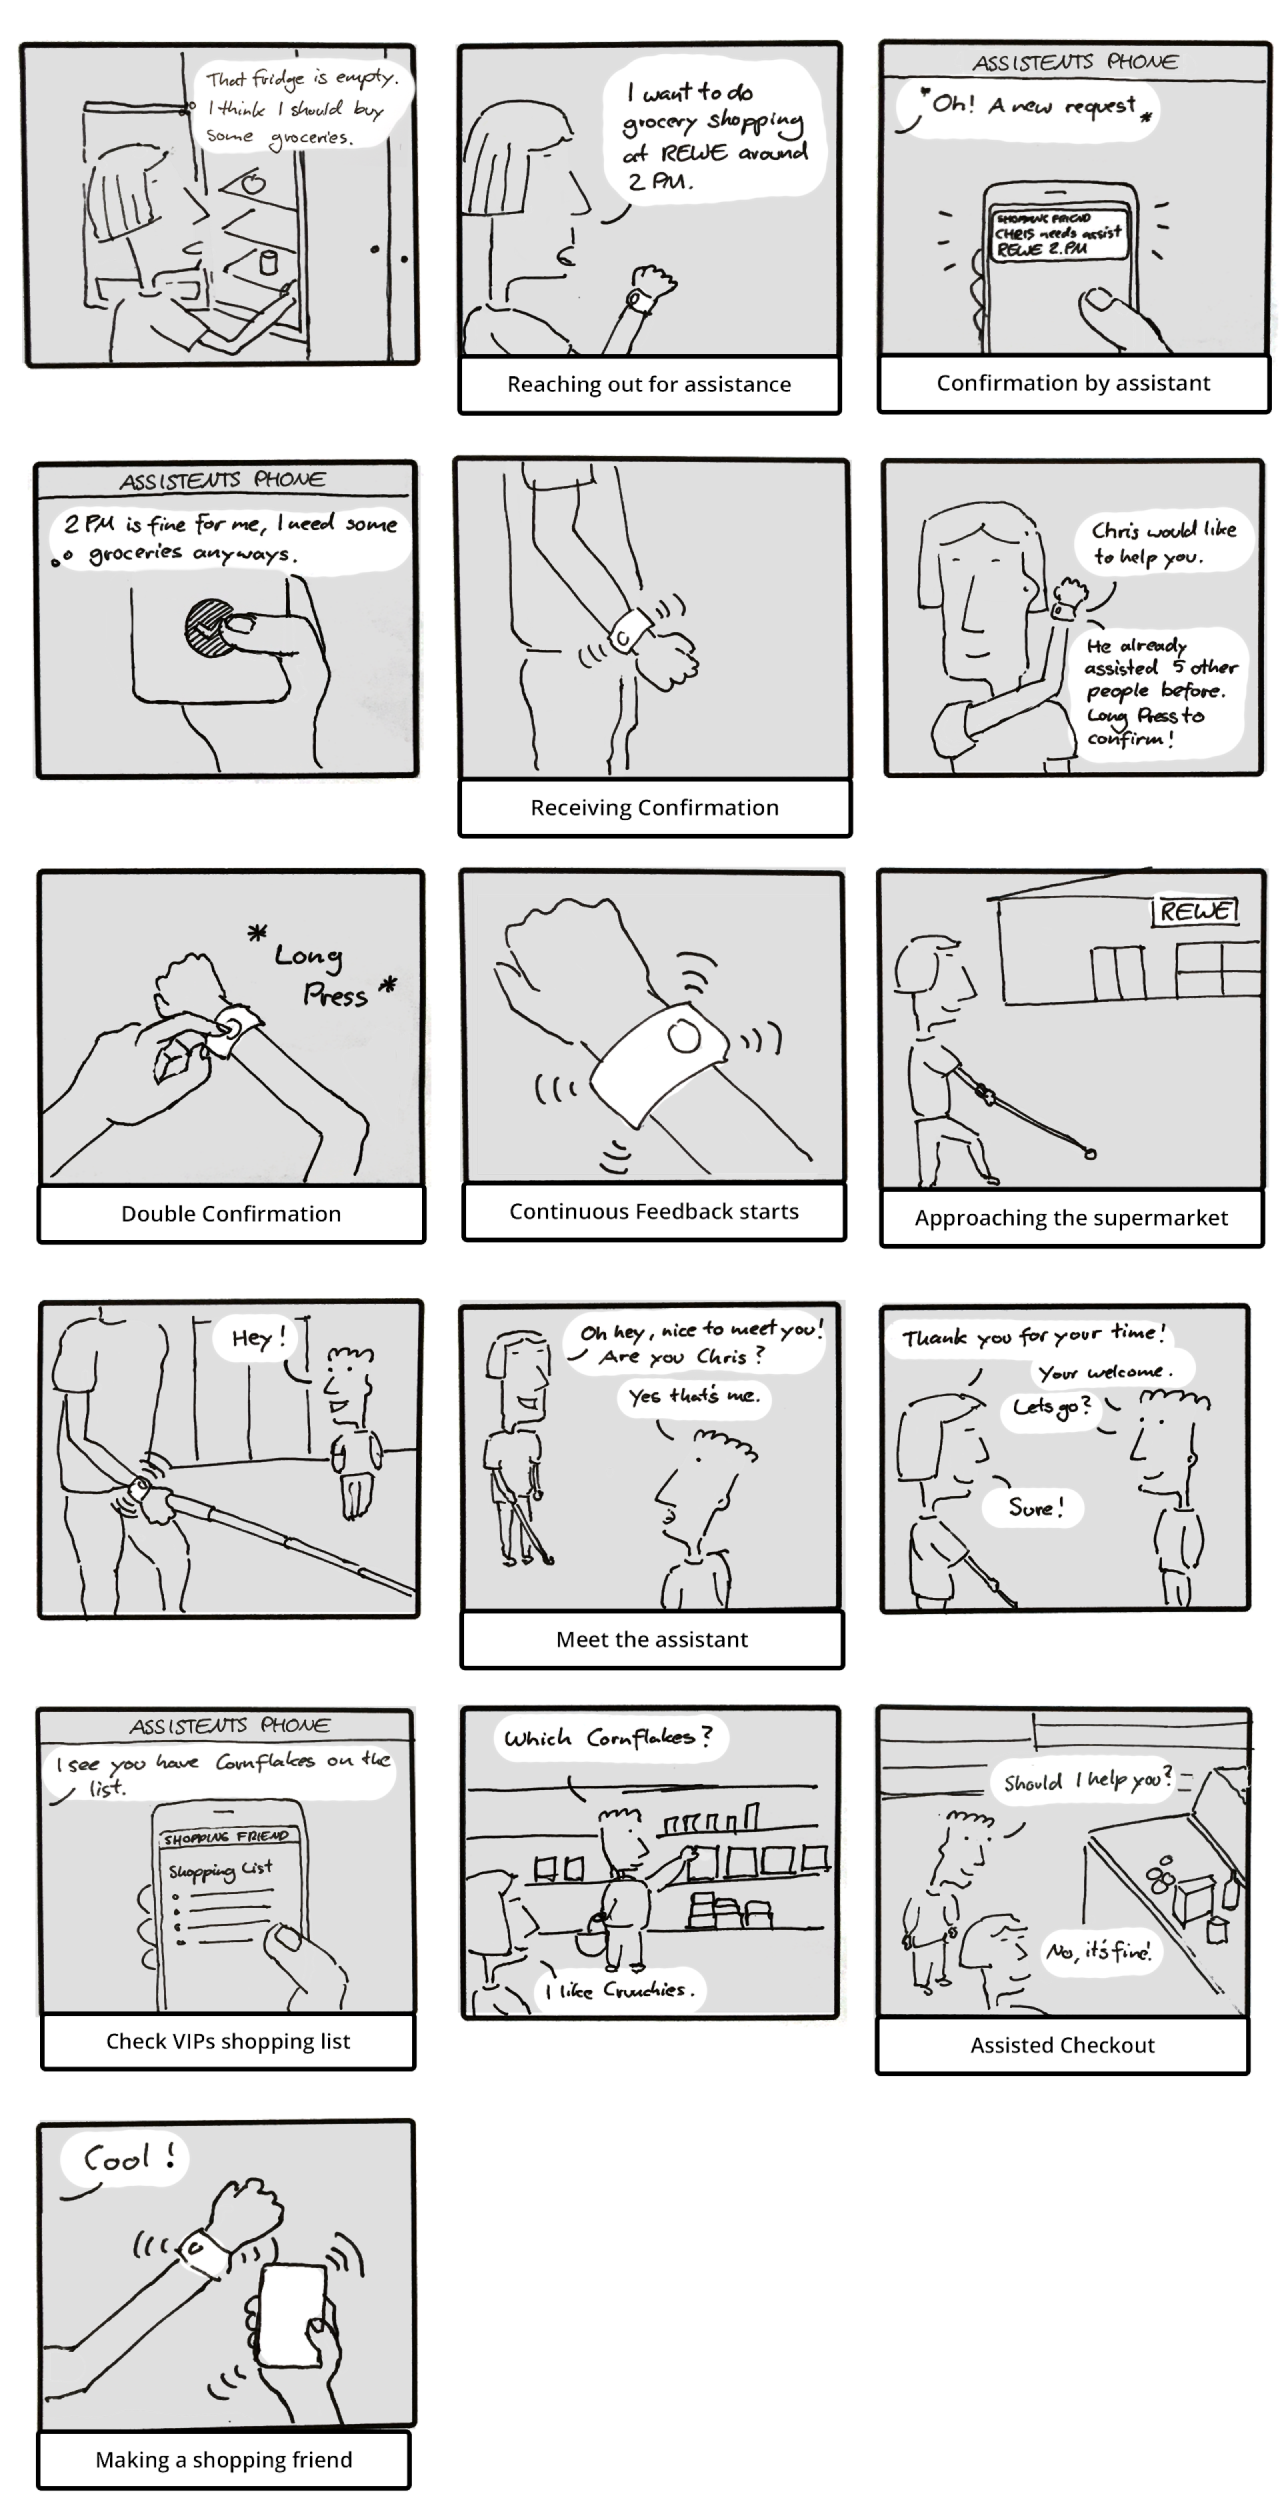 Comic-like storyboard that shows the usage of the wearable device.